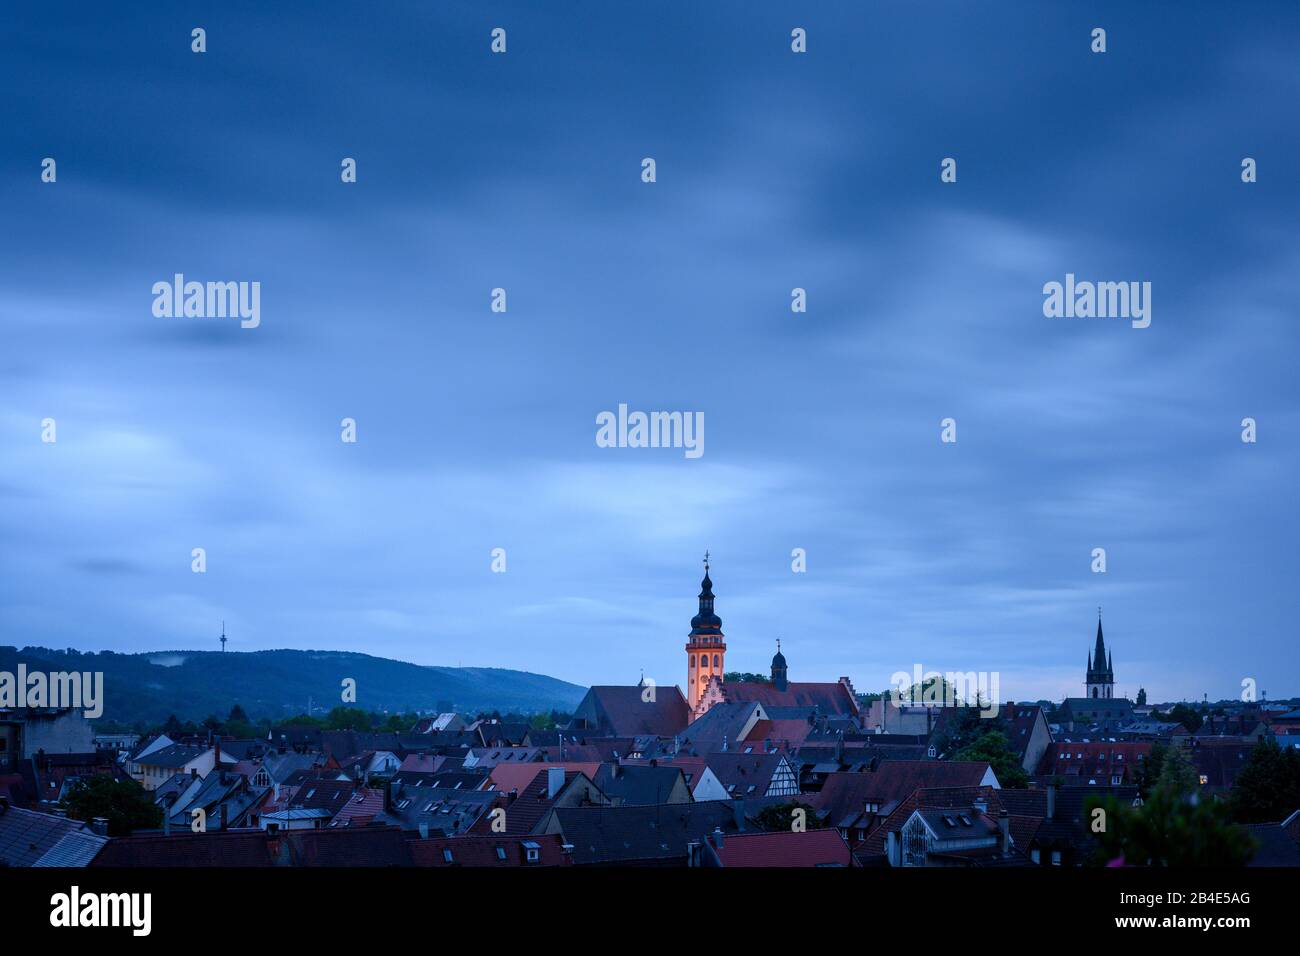 Germany, Baden-Württemberg, Karlsruhe, district Durlach, view over the old town in the evening. Stock Photo